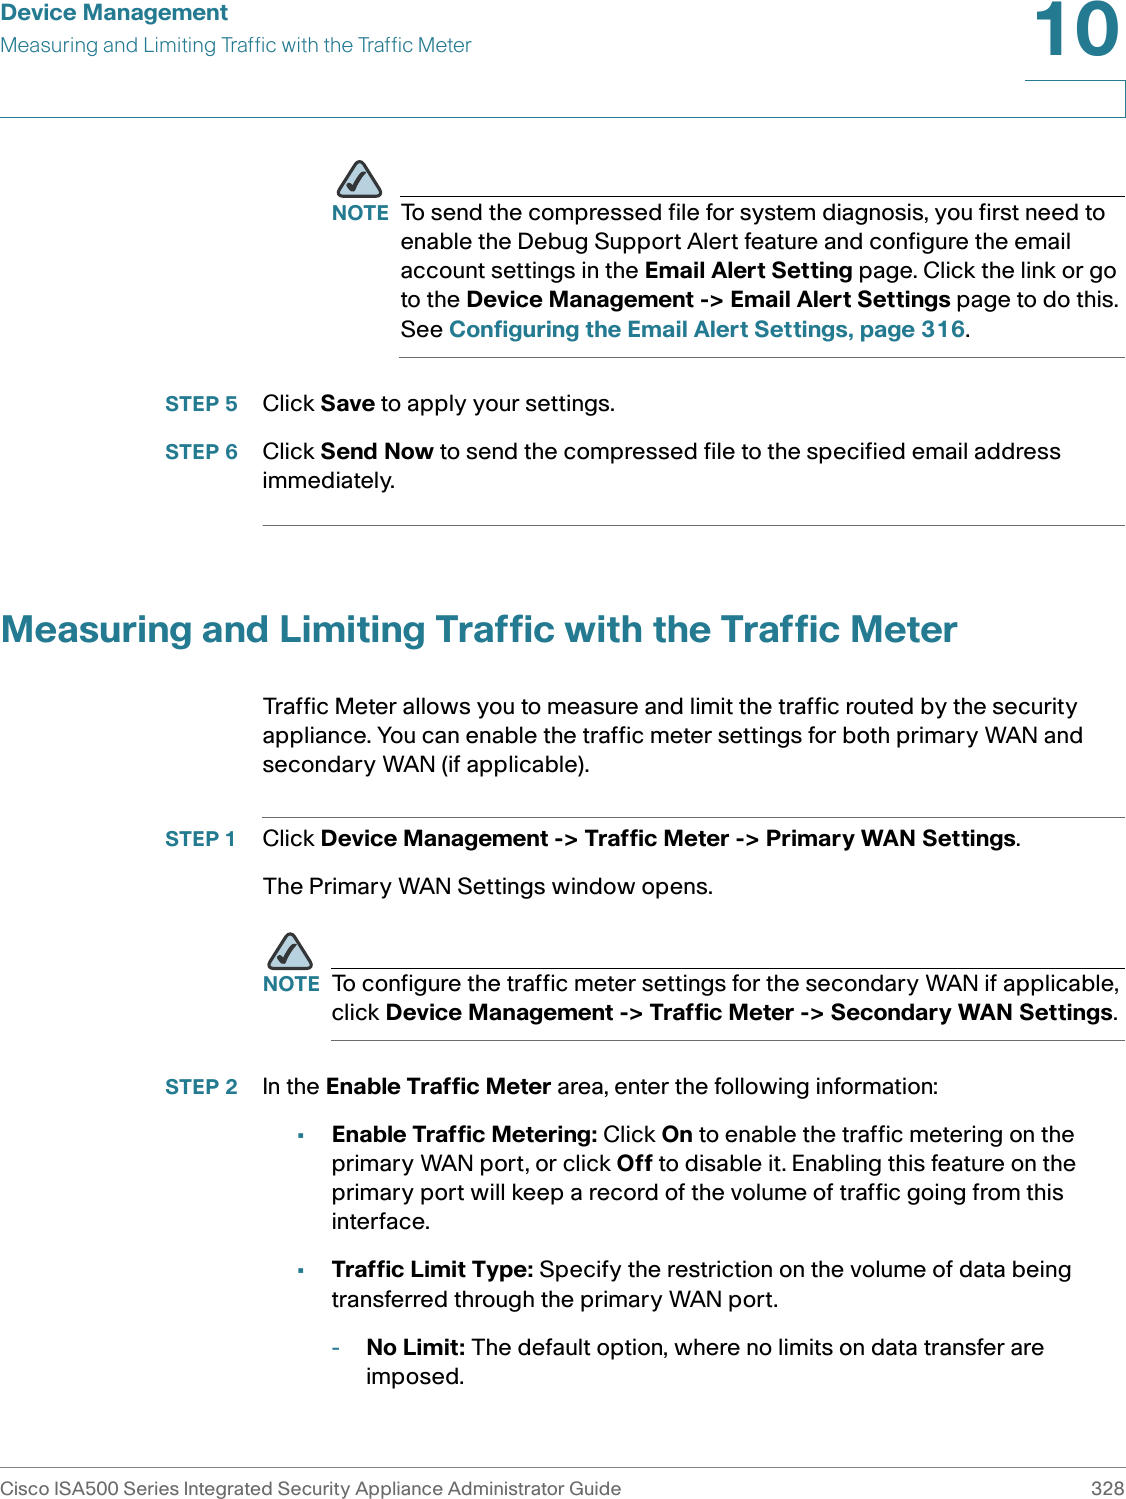 Device ManagementMeasuring and Limiting Traffic with the Traffic MeterCisco ISA500 Series Integrated Security Appliance Administrator Guide 32810 NOTE To send the compressed file for system diagnosis, you first need to enable the Debug Support Alert feature and configure the email account settings in the Email Alert Setting page. Click the link or go to the Device Management -&gt; Email Alert Settings page to do this. See Configuring the Email Alert Settings, page 316.STEP 5 Click Save to apply your settings. STEP 6 Click Send Now to send the compressed file to the specified email address immediately. Measuring and Limiting Traffic with the Traffic MeterTraffic Meter allows you to measure and limit the traffic routed by the security appliance. You can enable the traffic meter settings for both primary WAN and secondary WAN (if applicable).STEP 1 Click Device Management -&gt; Traffic Meter -&gt; Primary WAN Settings. The Primary WAN Settings window opens. NOTE To configure the traffic meter settings for the secondary WAN if applicable, click Device Management -&gt; Traffic Meter -&gt; Secondary WAN Settings. STEP 2 In the Enable Traffic Meter area, enter the following information:•Enable Traffic Metering: Click On to enable the traffic metering on the primary WAN port, or click Off to disable it. Enabling this feature on the primary port will keep a record of the volume of traffic going from this interface. •Traffic Limit Type: Specify the restriction on the volume of data being transferred through the primary WAN port. -No Limit: The default option, where no limits on data transfer are imposed.